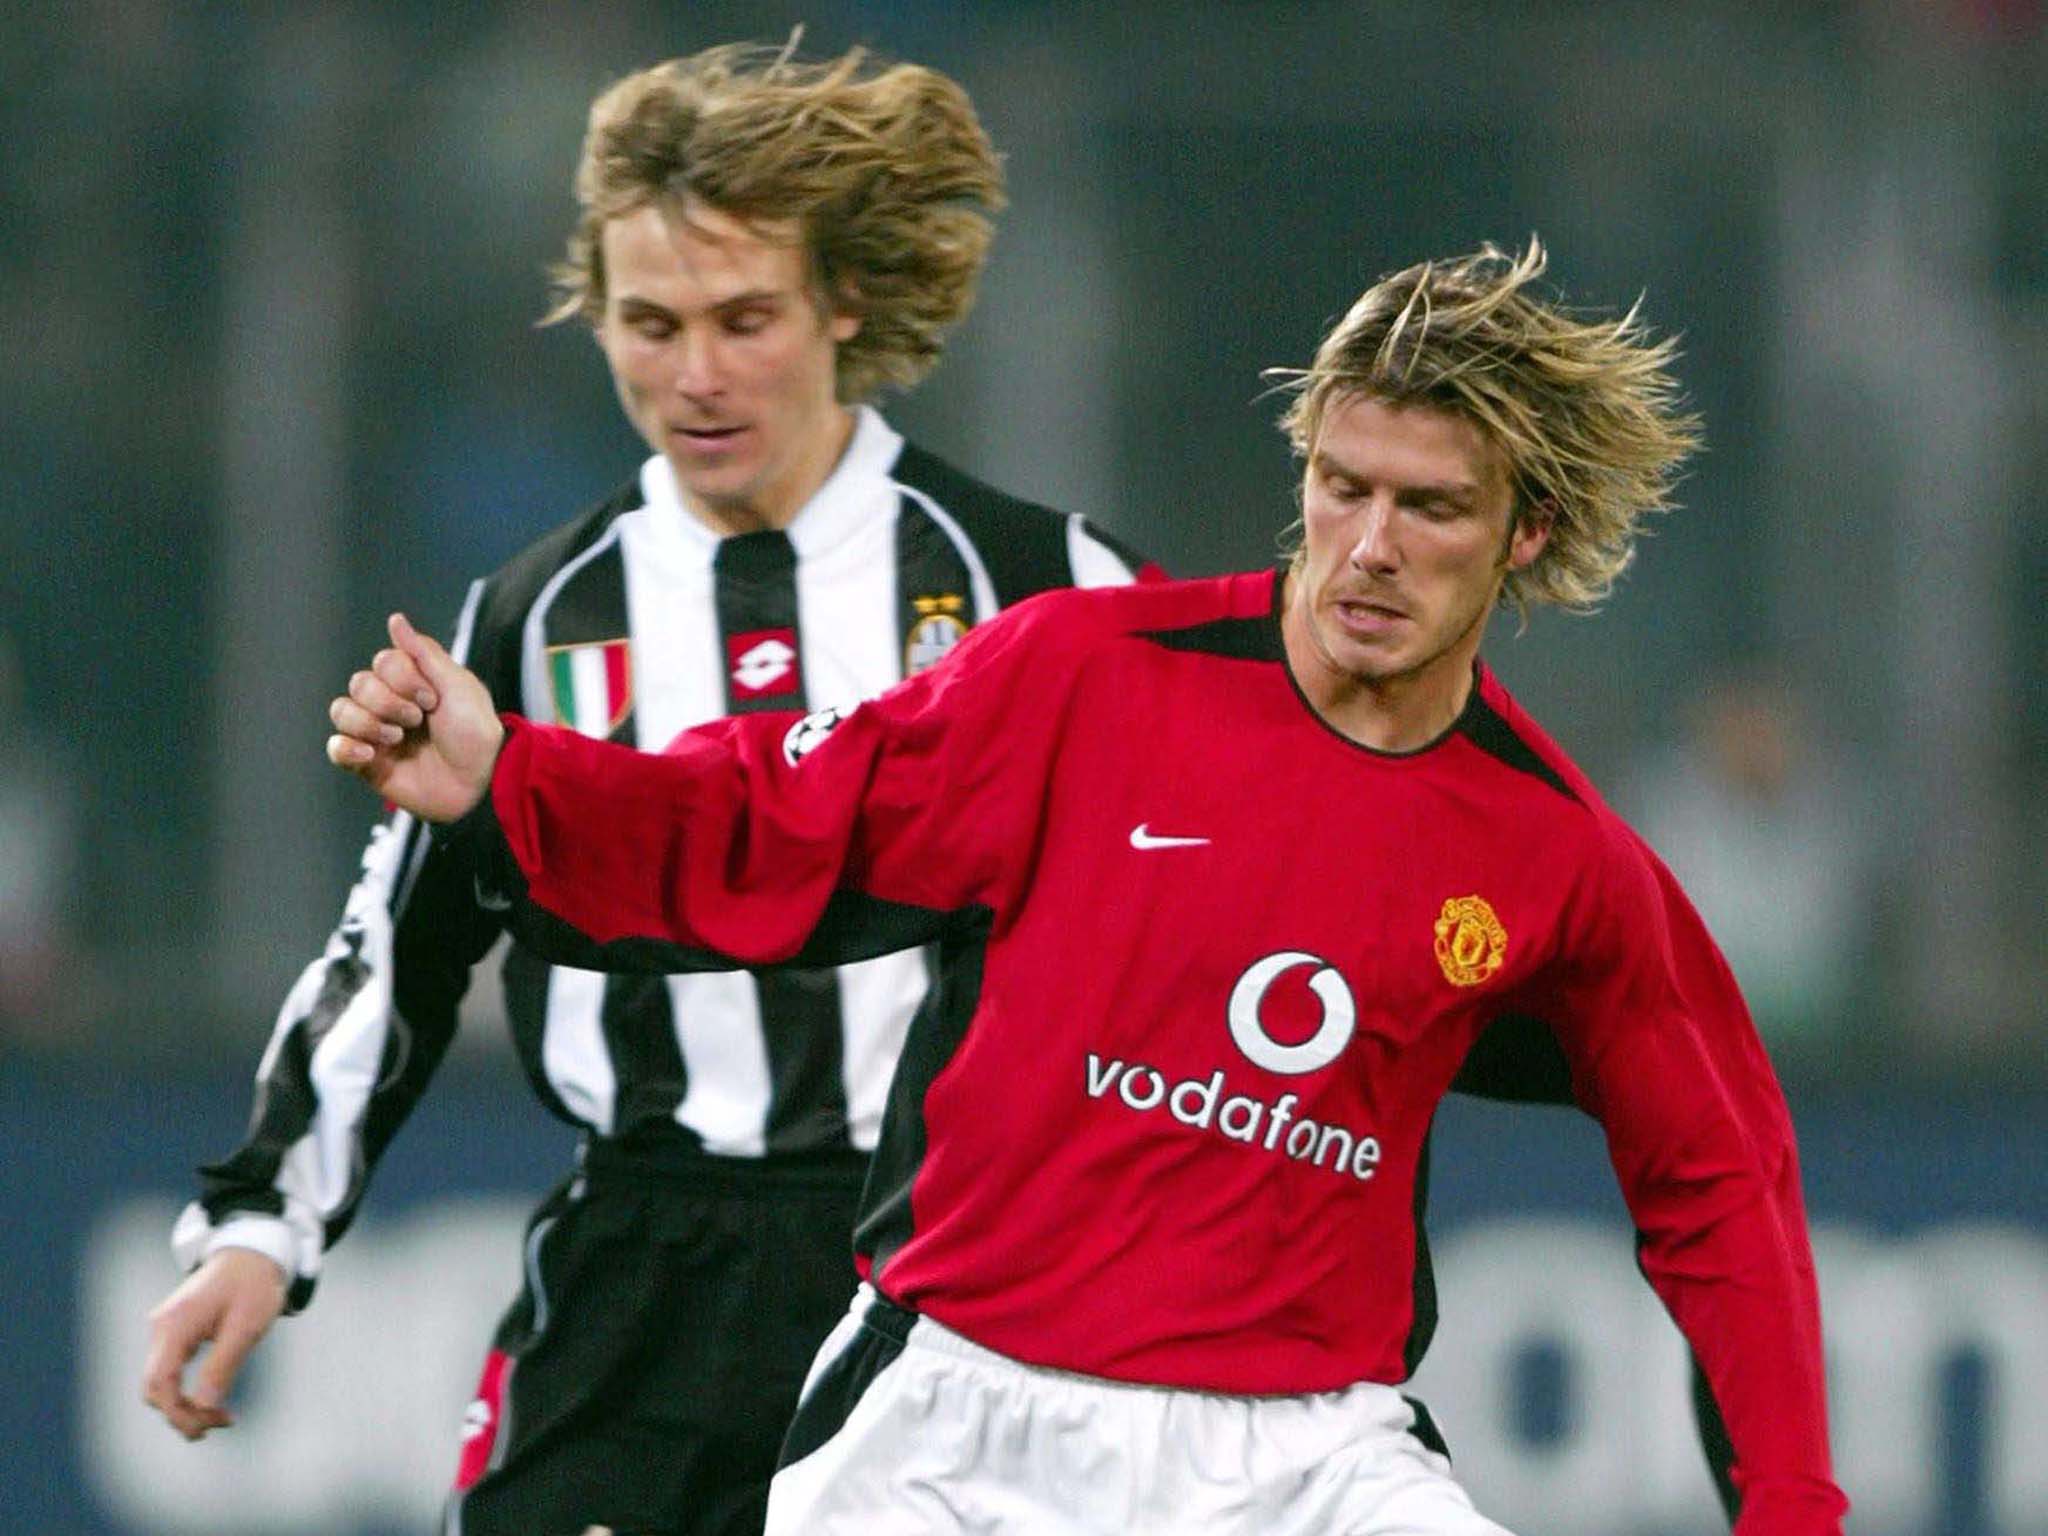 Nedved was named 2003 European Player of the Year